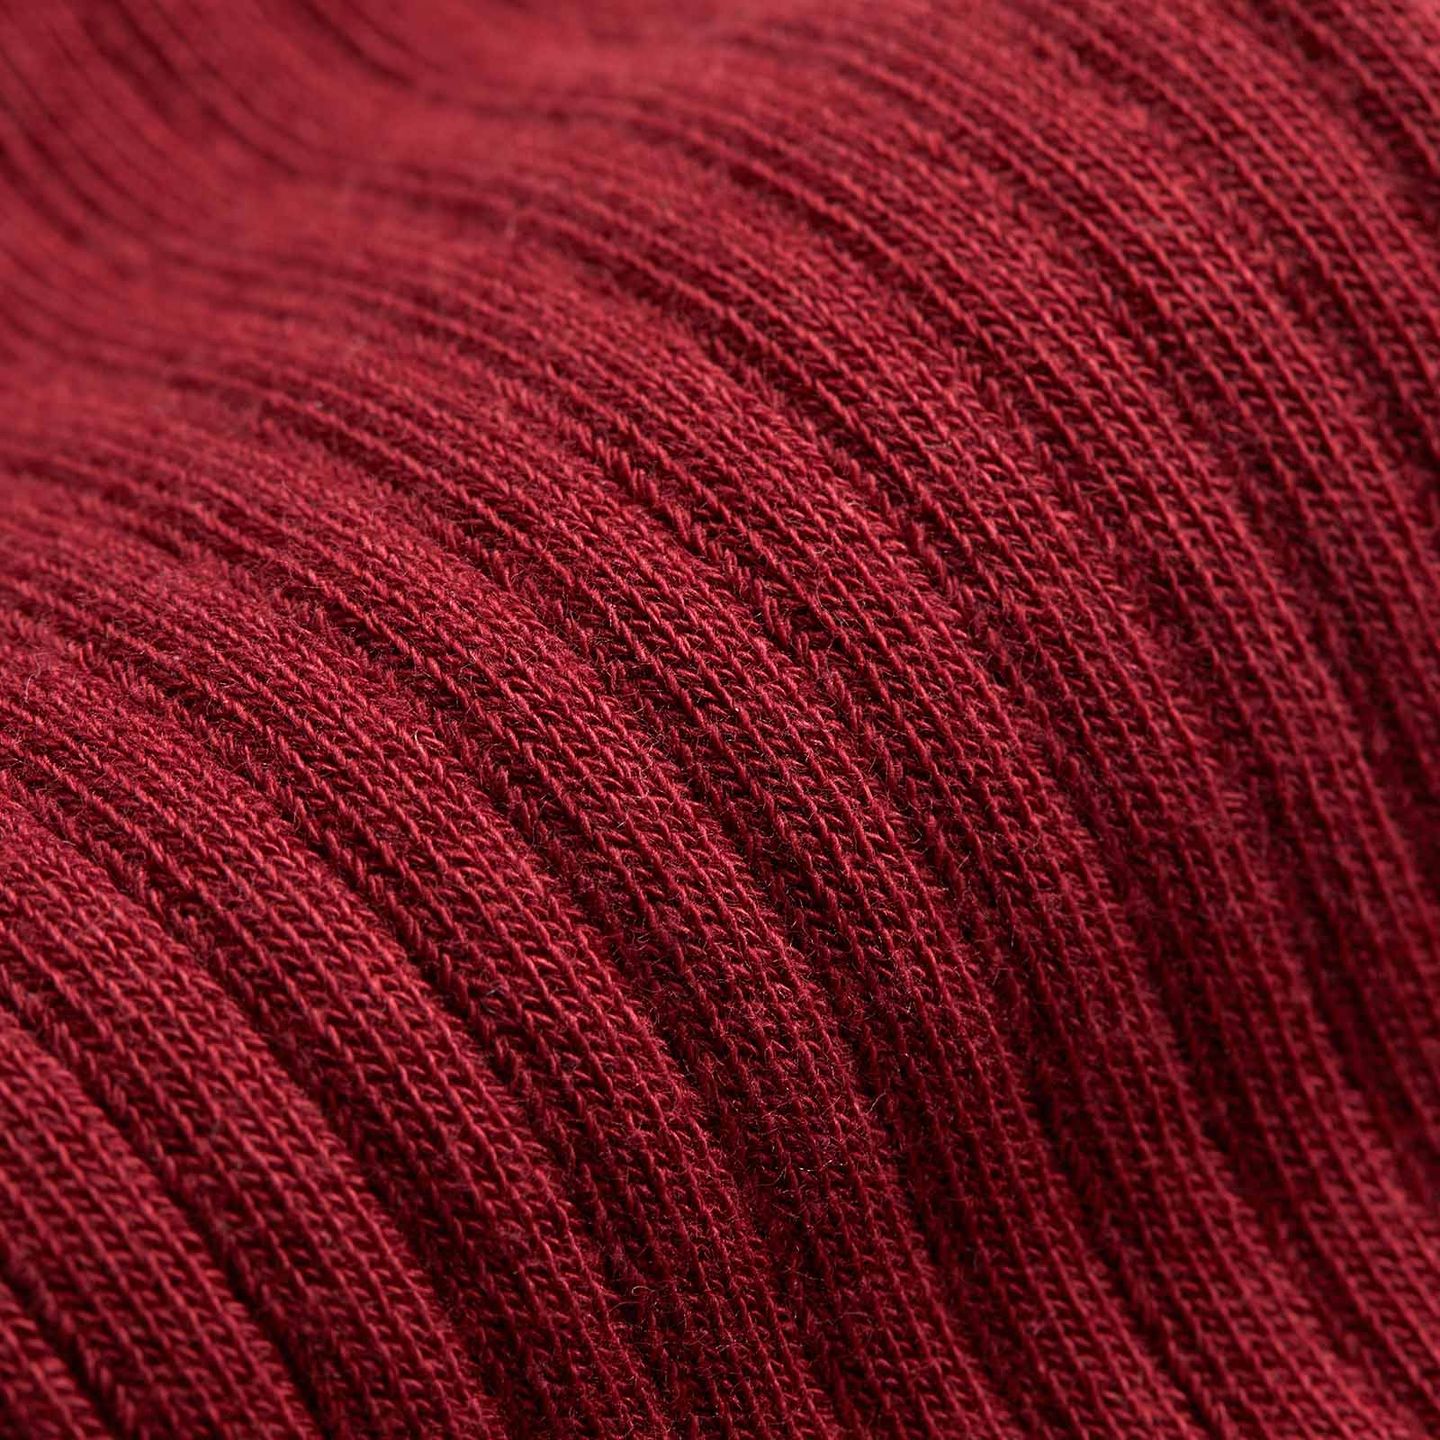 A close up of a red sock